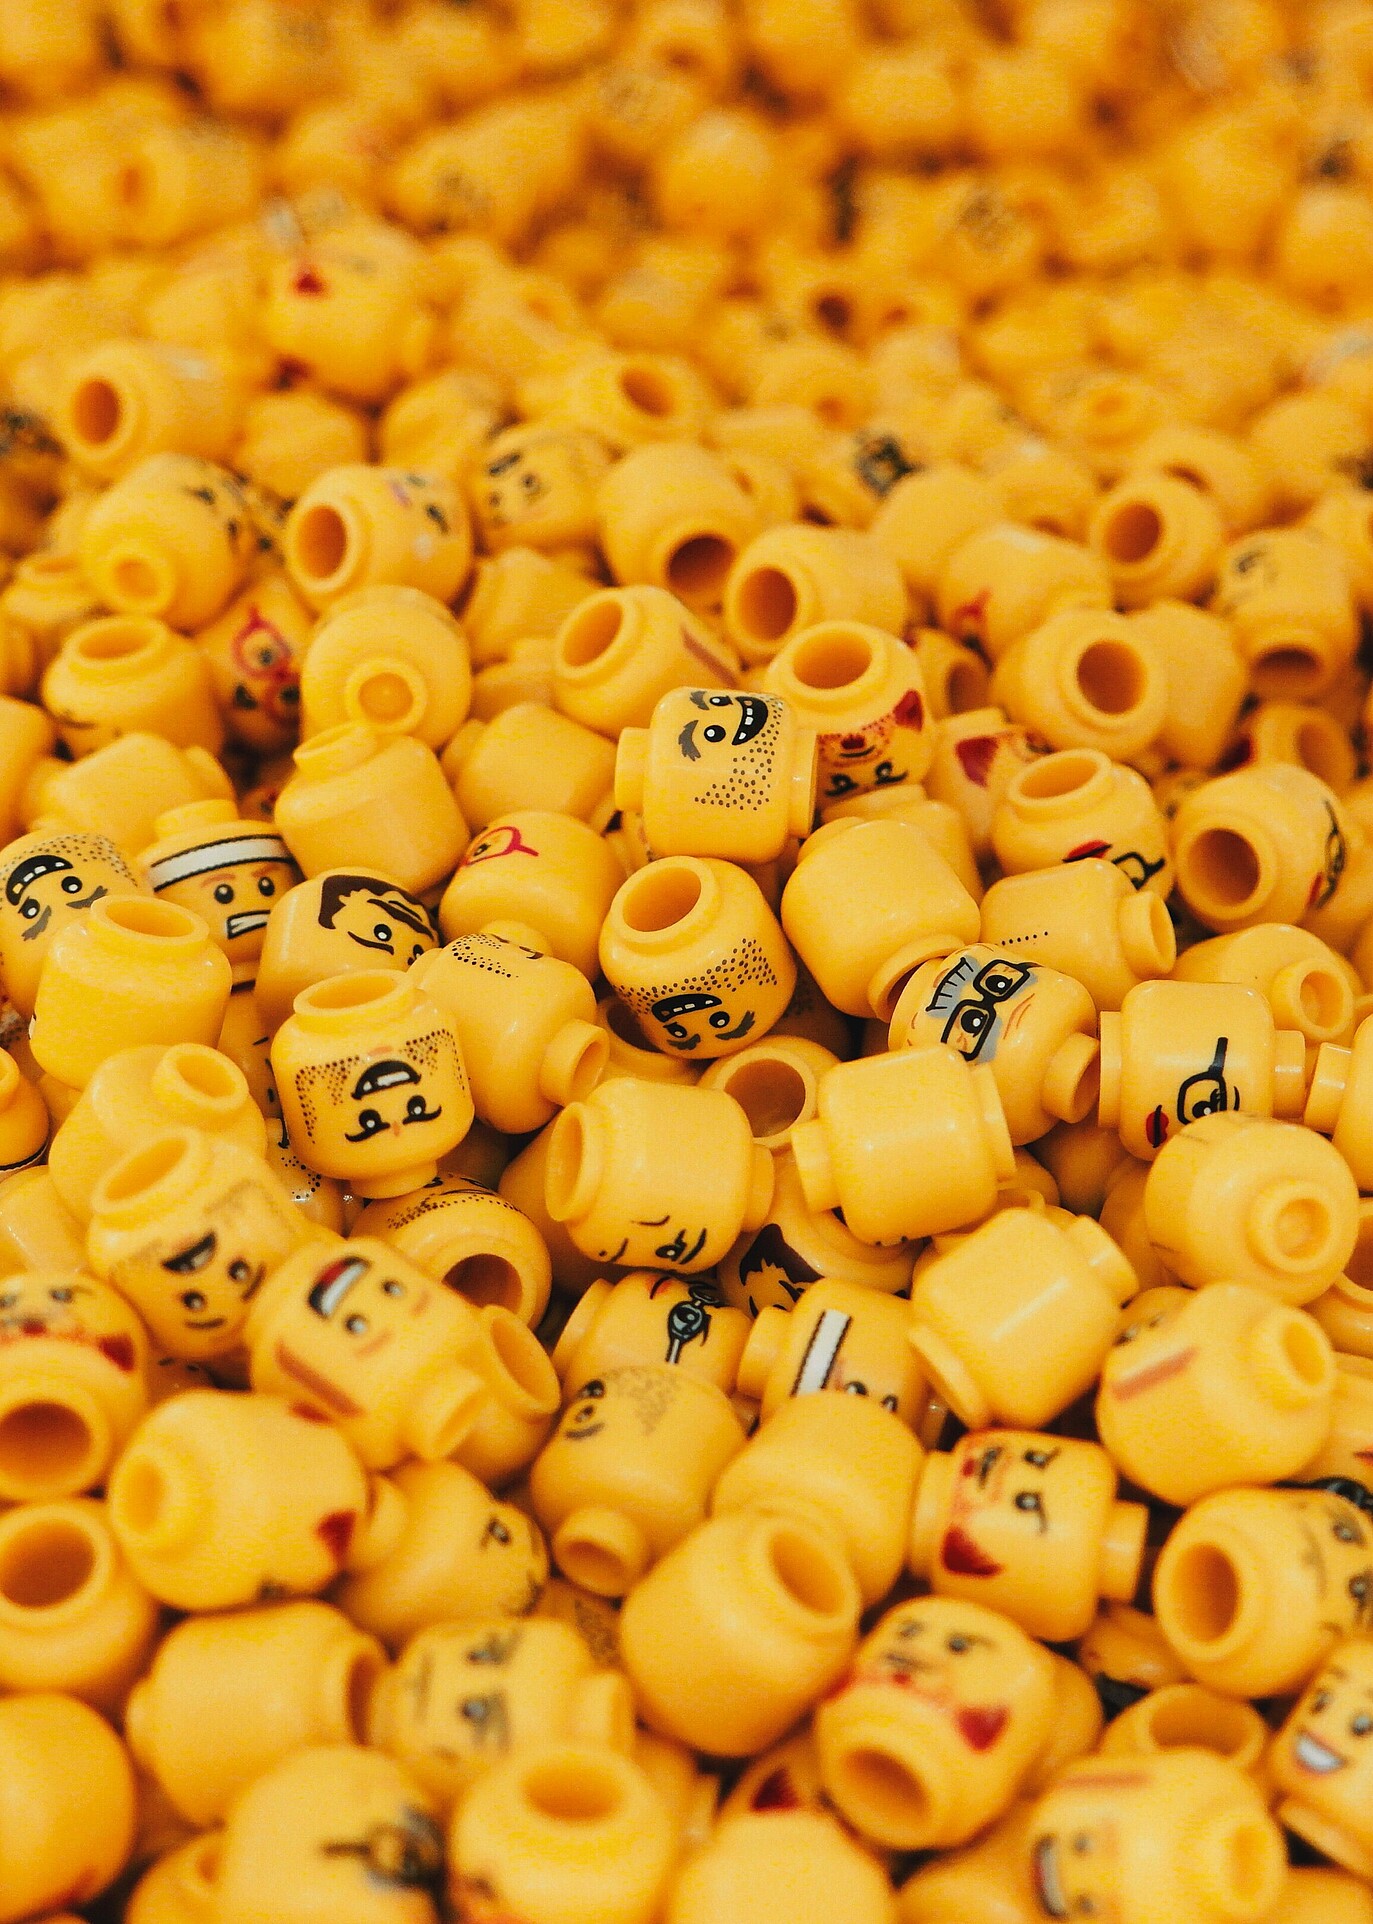 Endless sea of unique Lego heads, each with distinct features and expressions, illustrating the concept of individuality amidst uniformity.